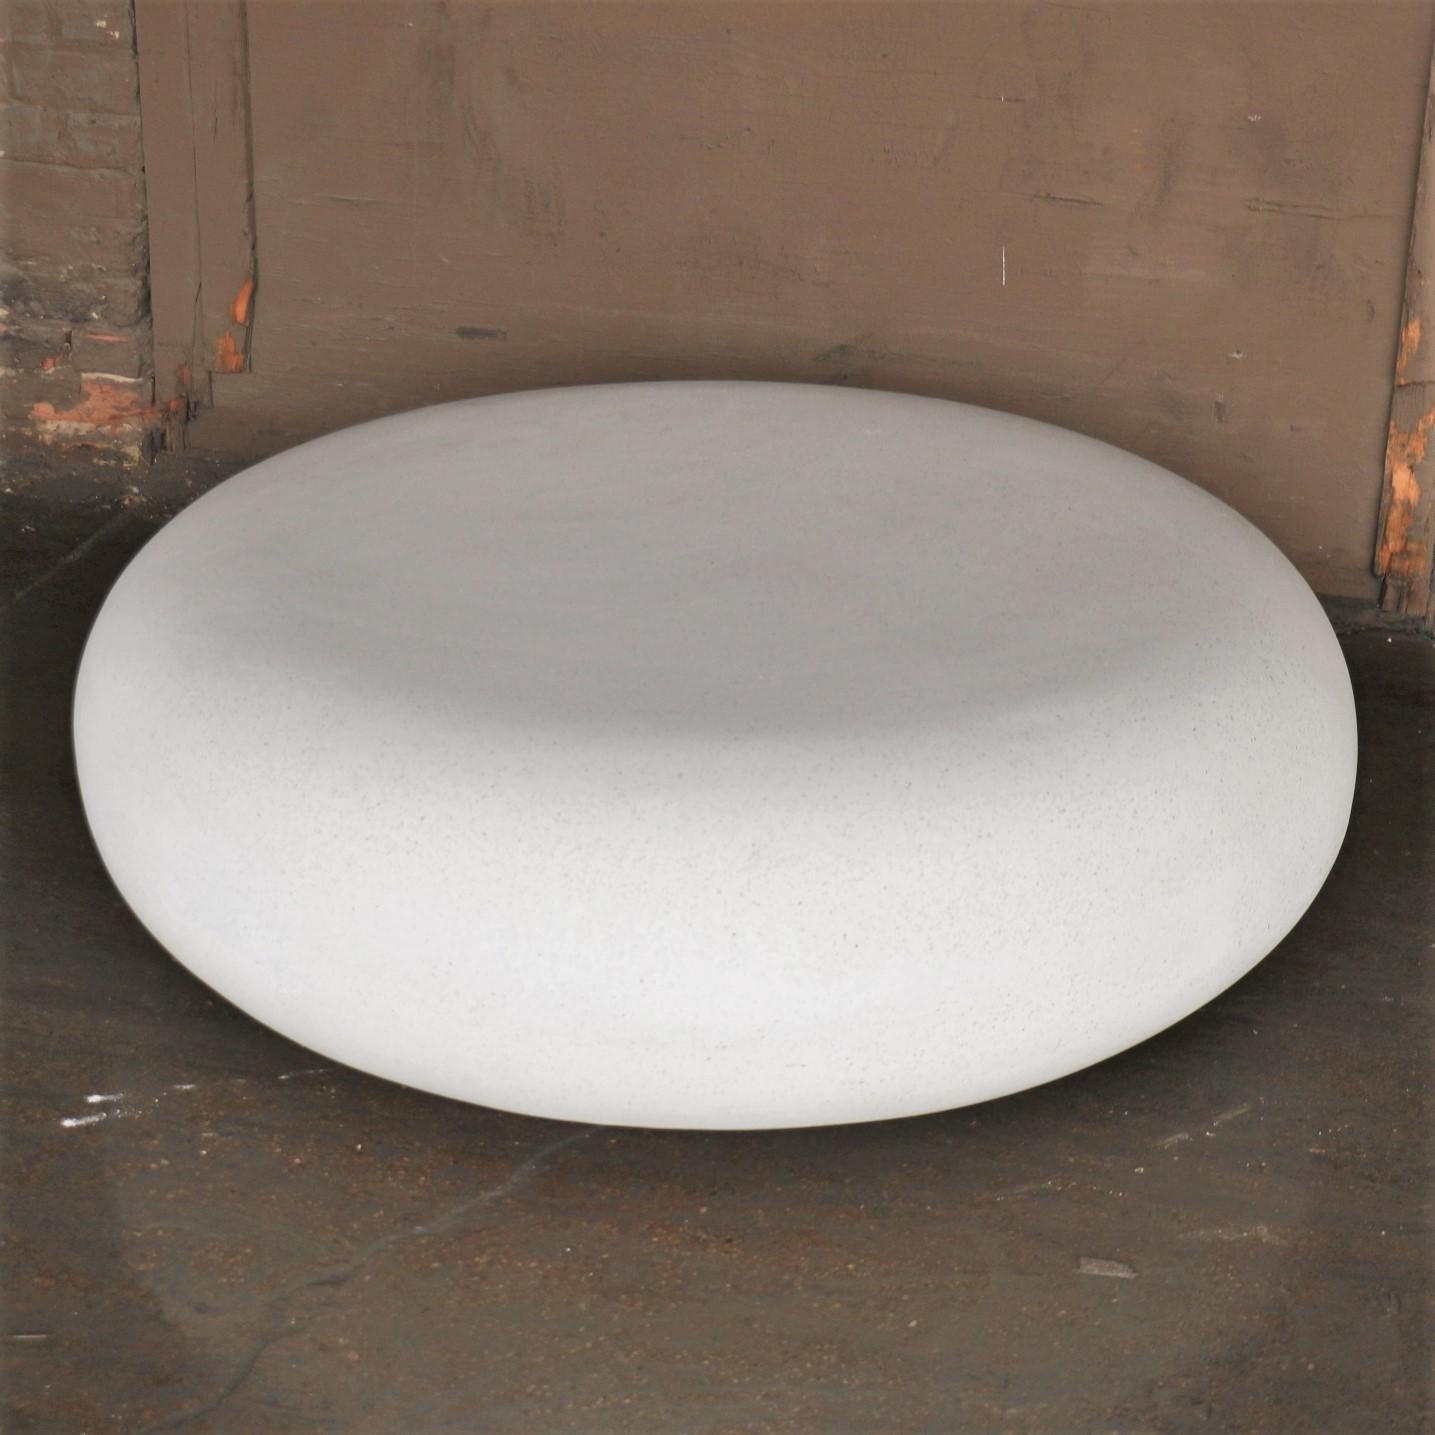 Minimalist Cast Resin 'Pebble' Low Table, White Stone Finish by Zachary A. Design For Sale